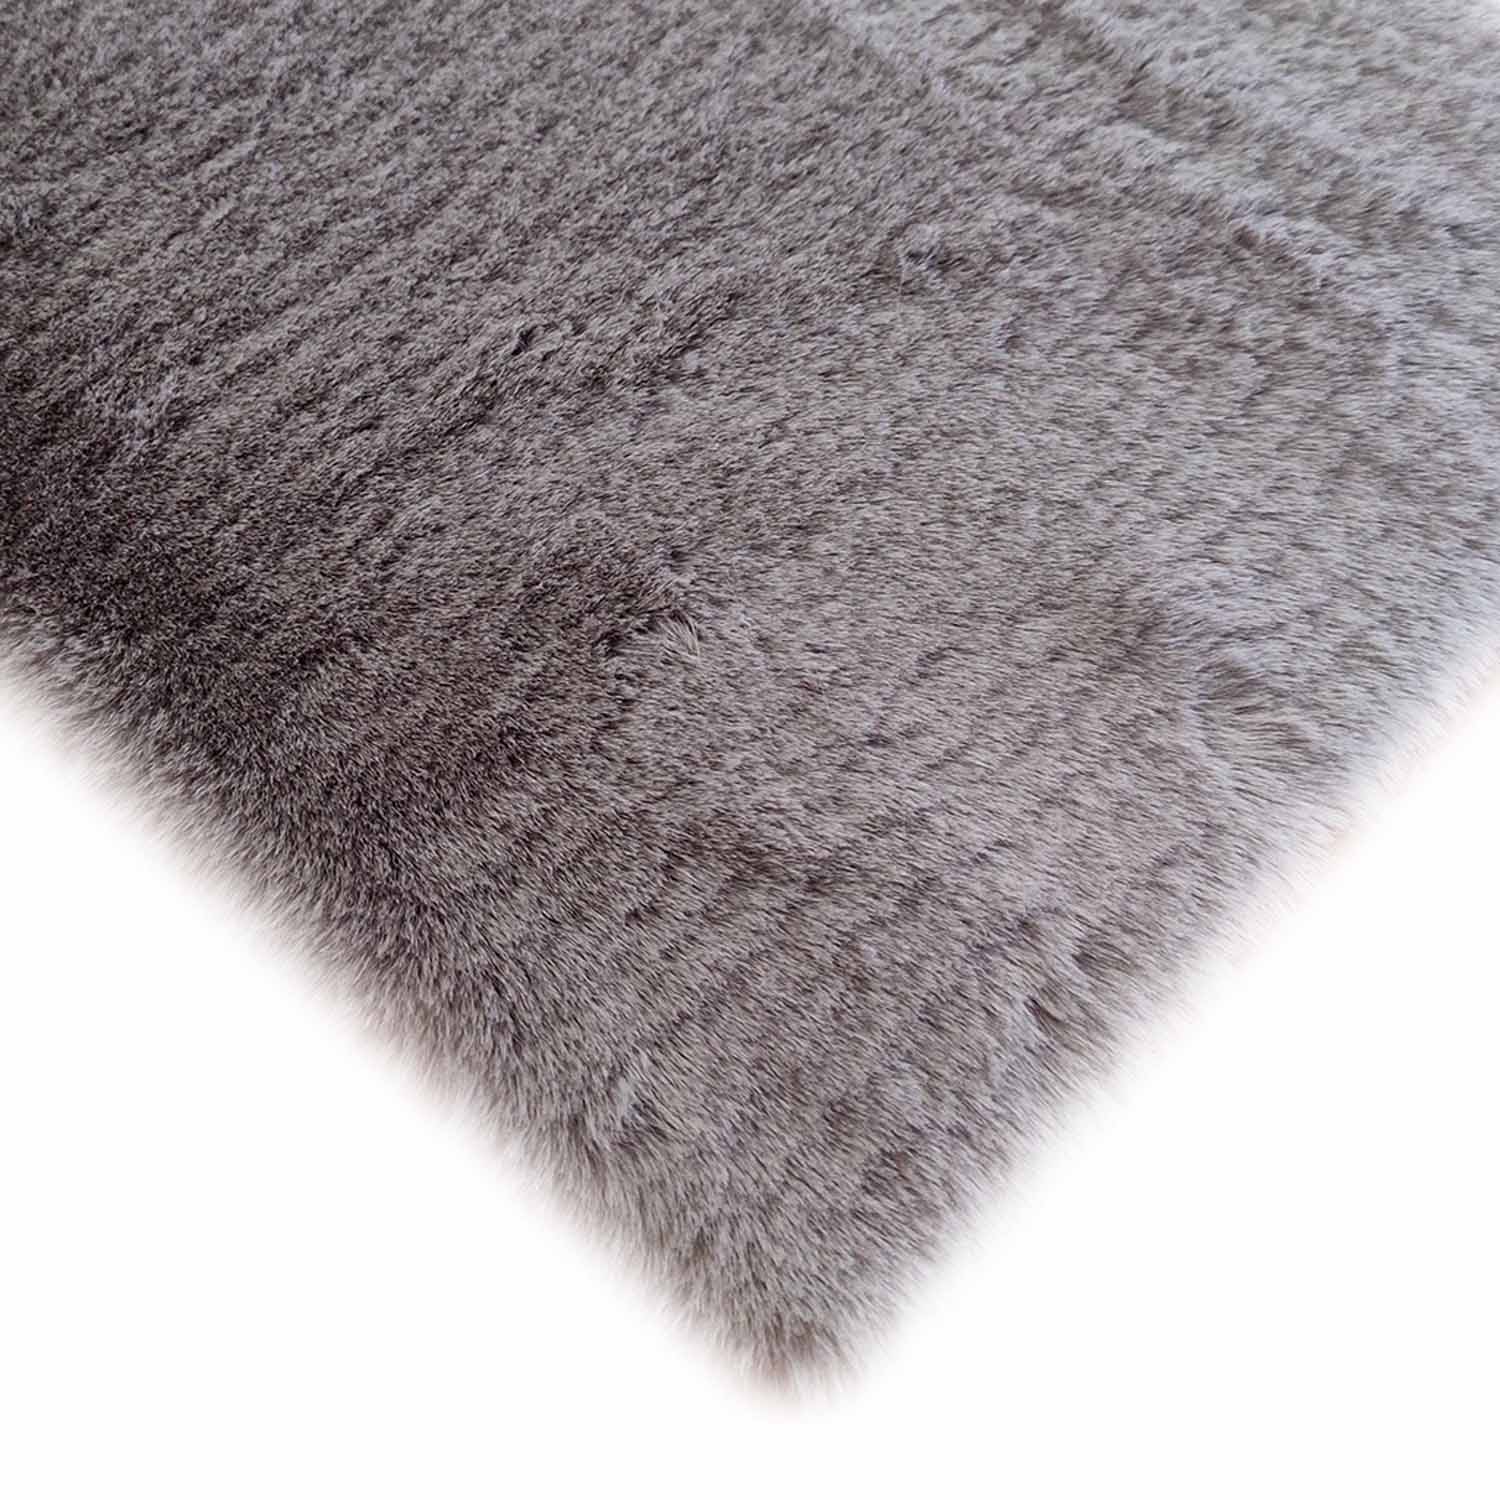 The Home Living Room Bambi Rug 100cm x 150cm - Grey 2 Shaws Department Stores